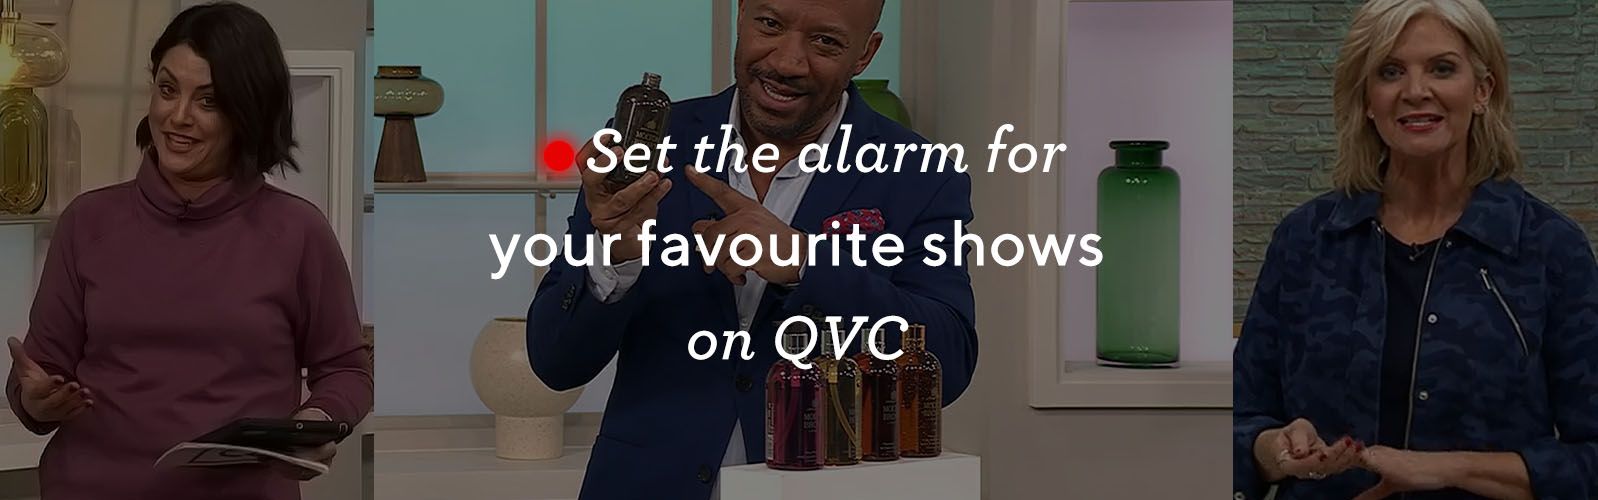 The Quiet Sea Change At QVC